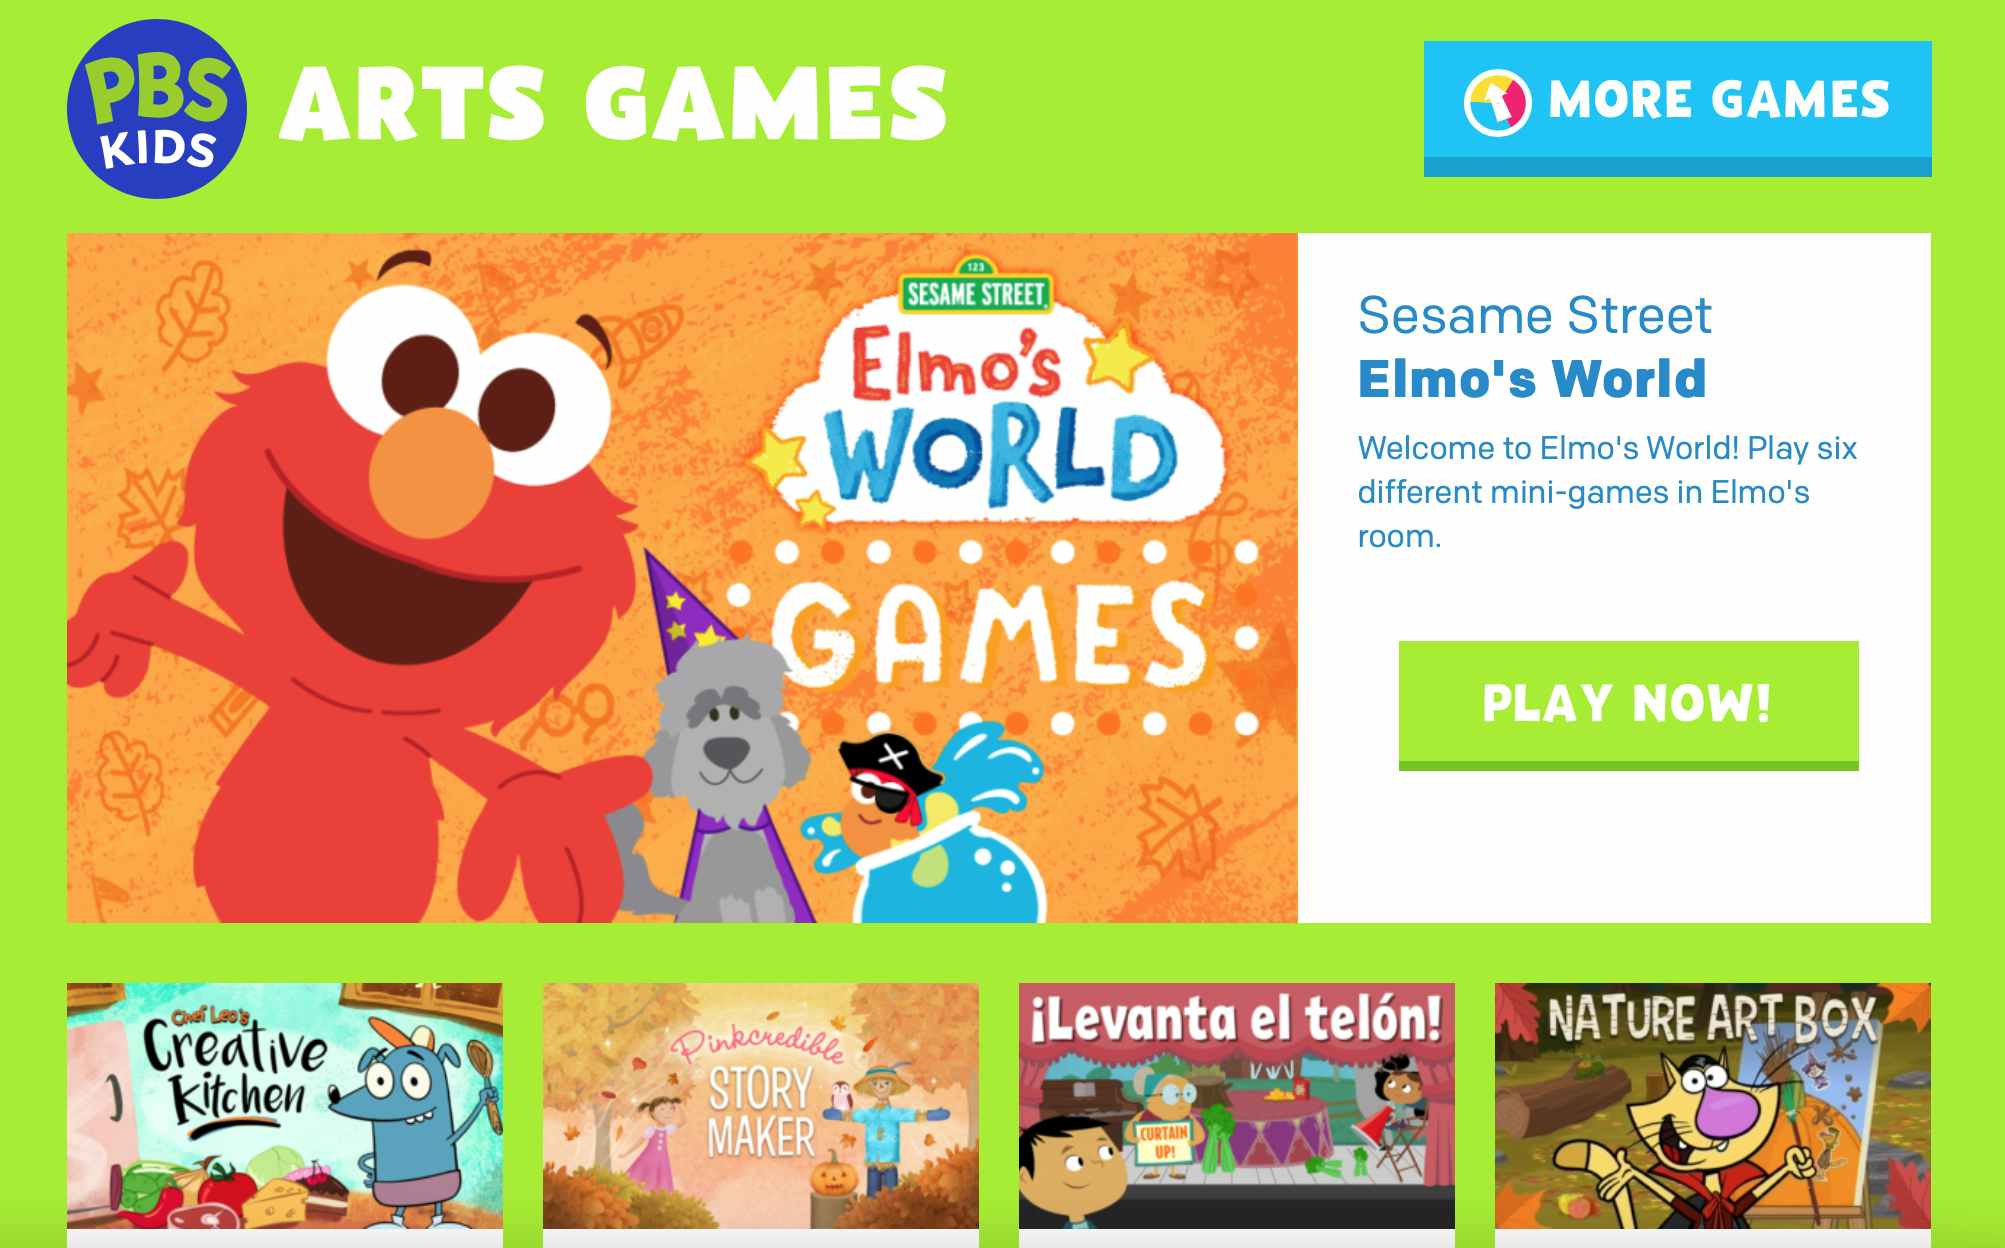 A screenshot of the PBS.org website for online art games featuring Elmo's World Games.